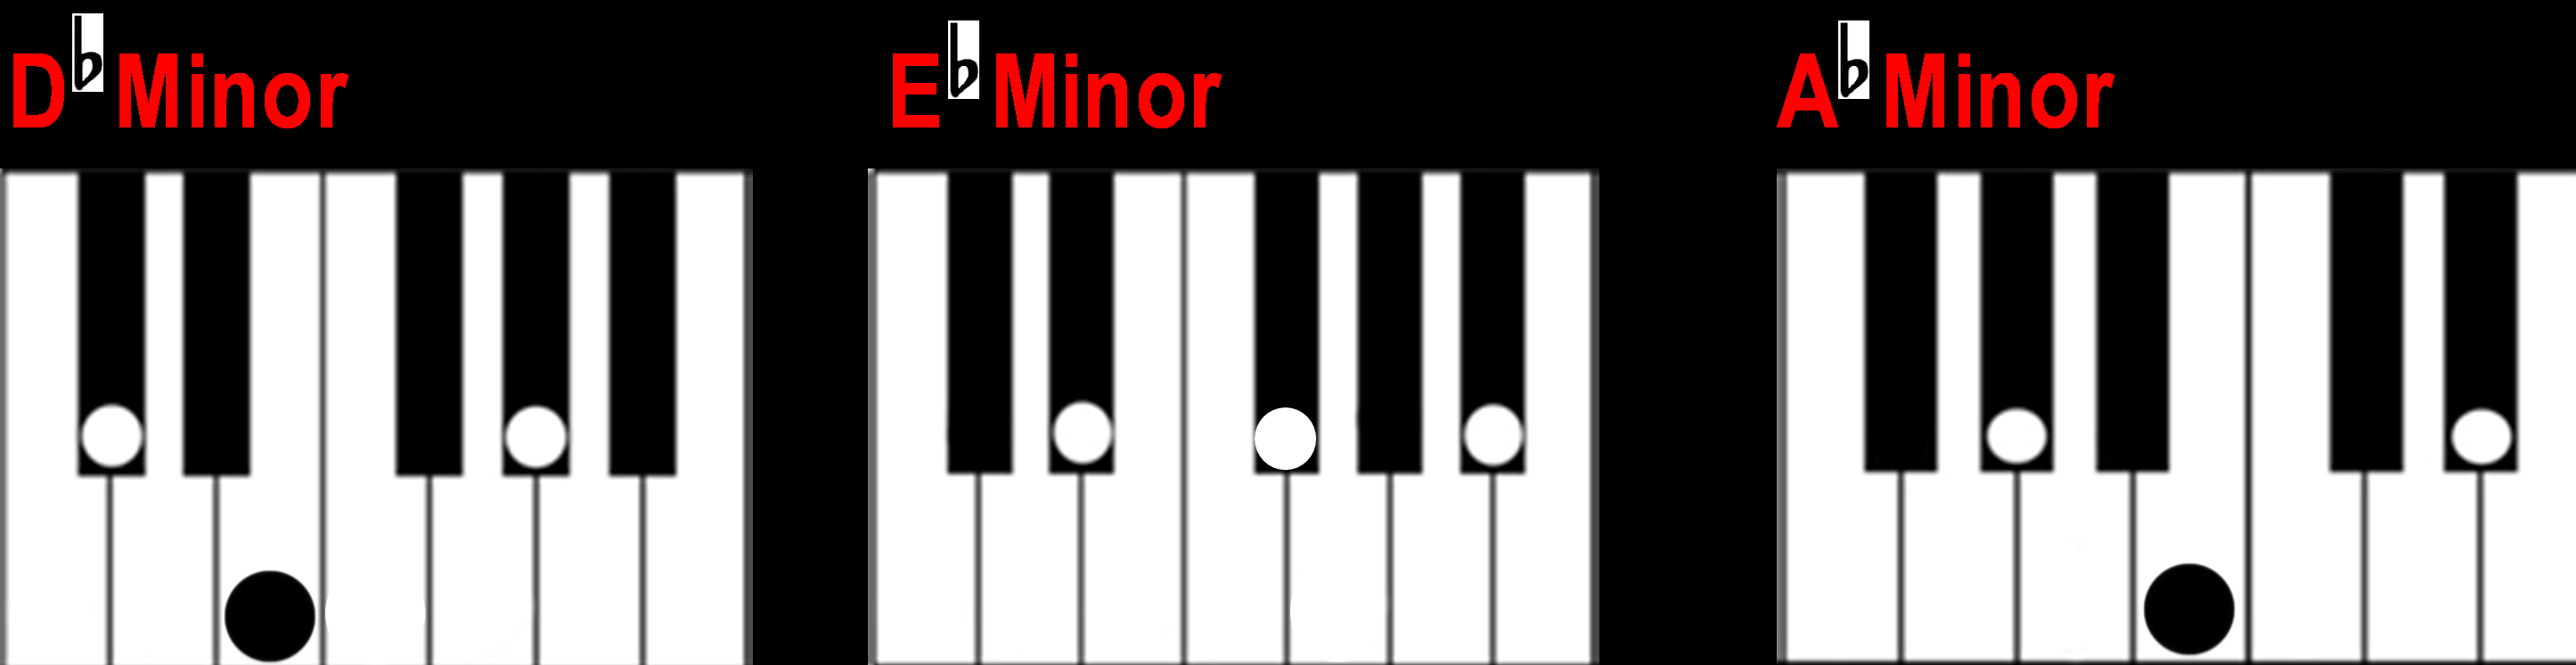 D Minor Chord Finding A Minor Chord On The Piano